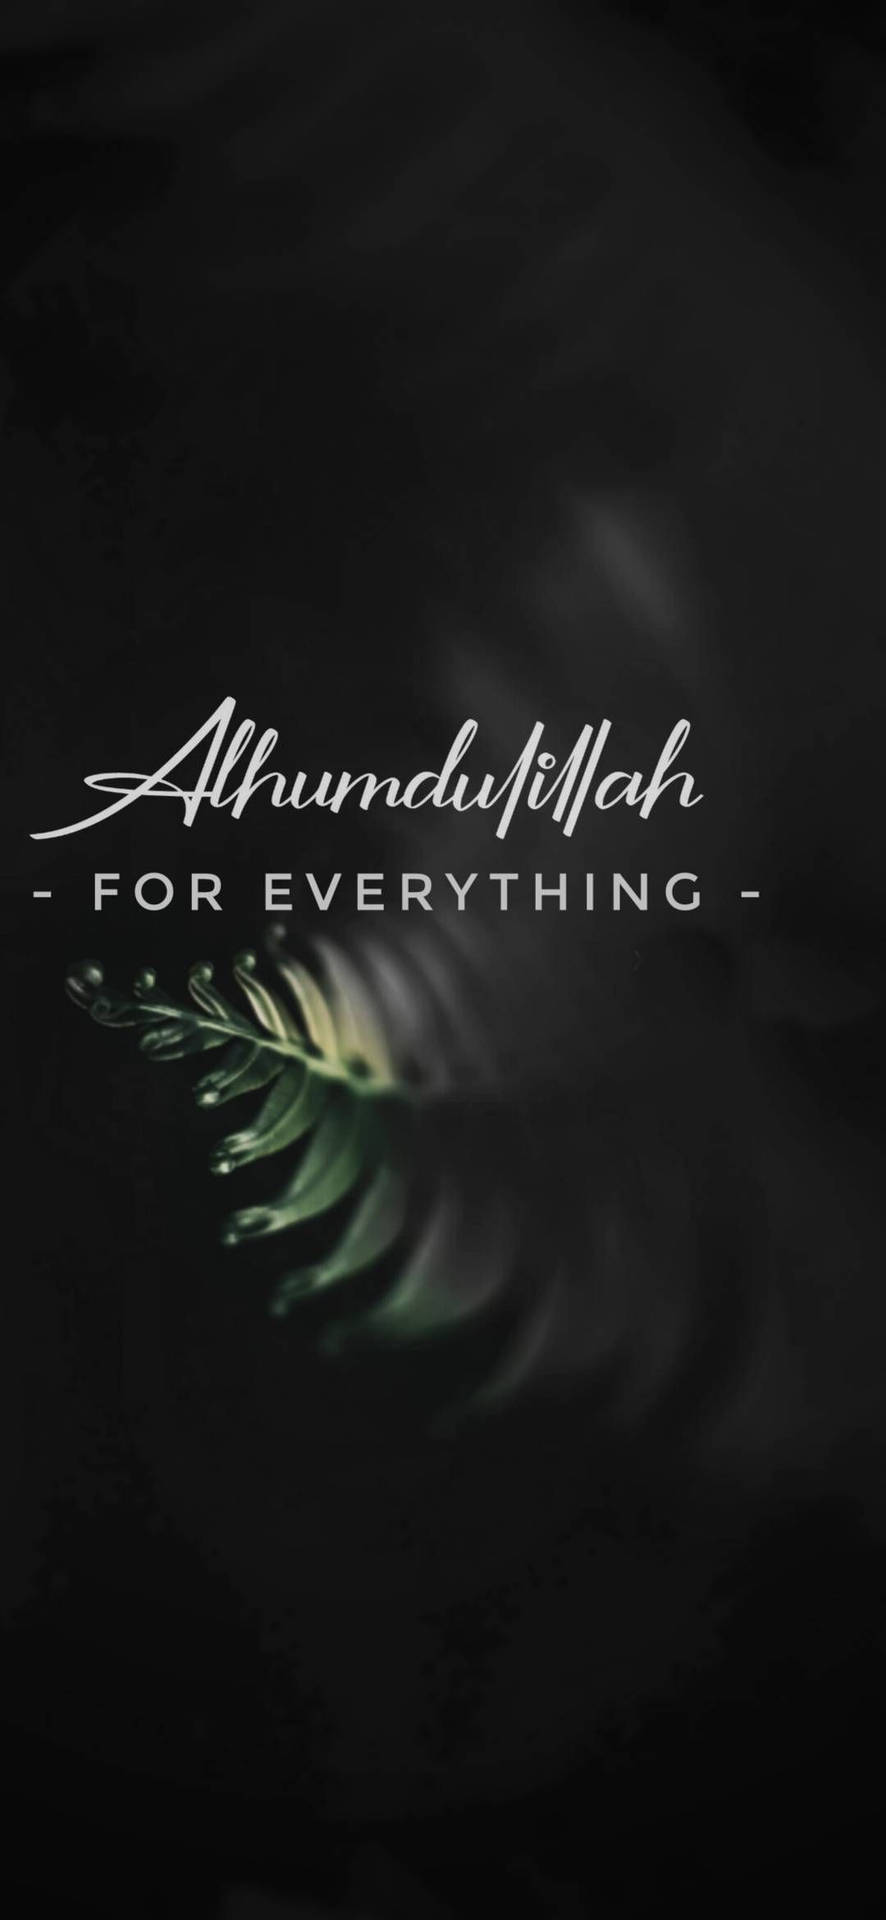 Download Alhamdulillah For Everything Wallpaper | Wallpapers.com